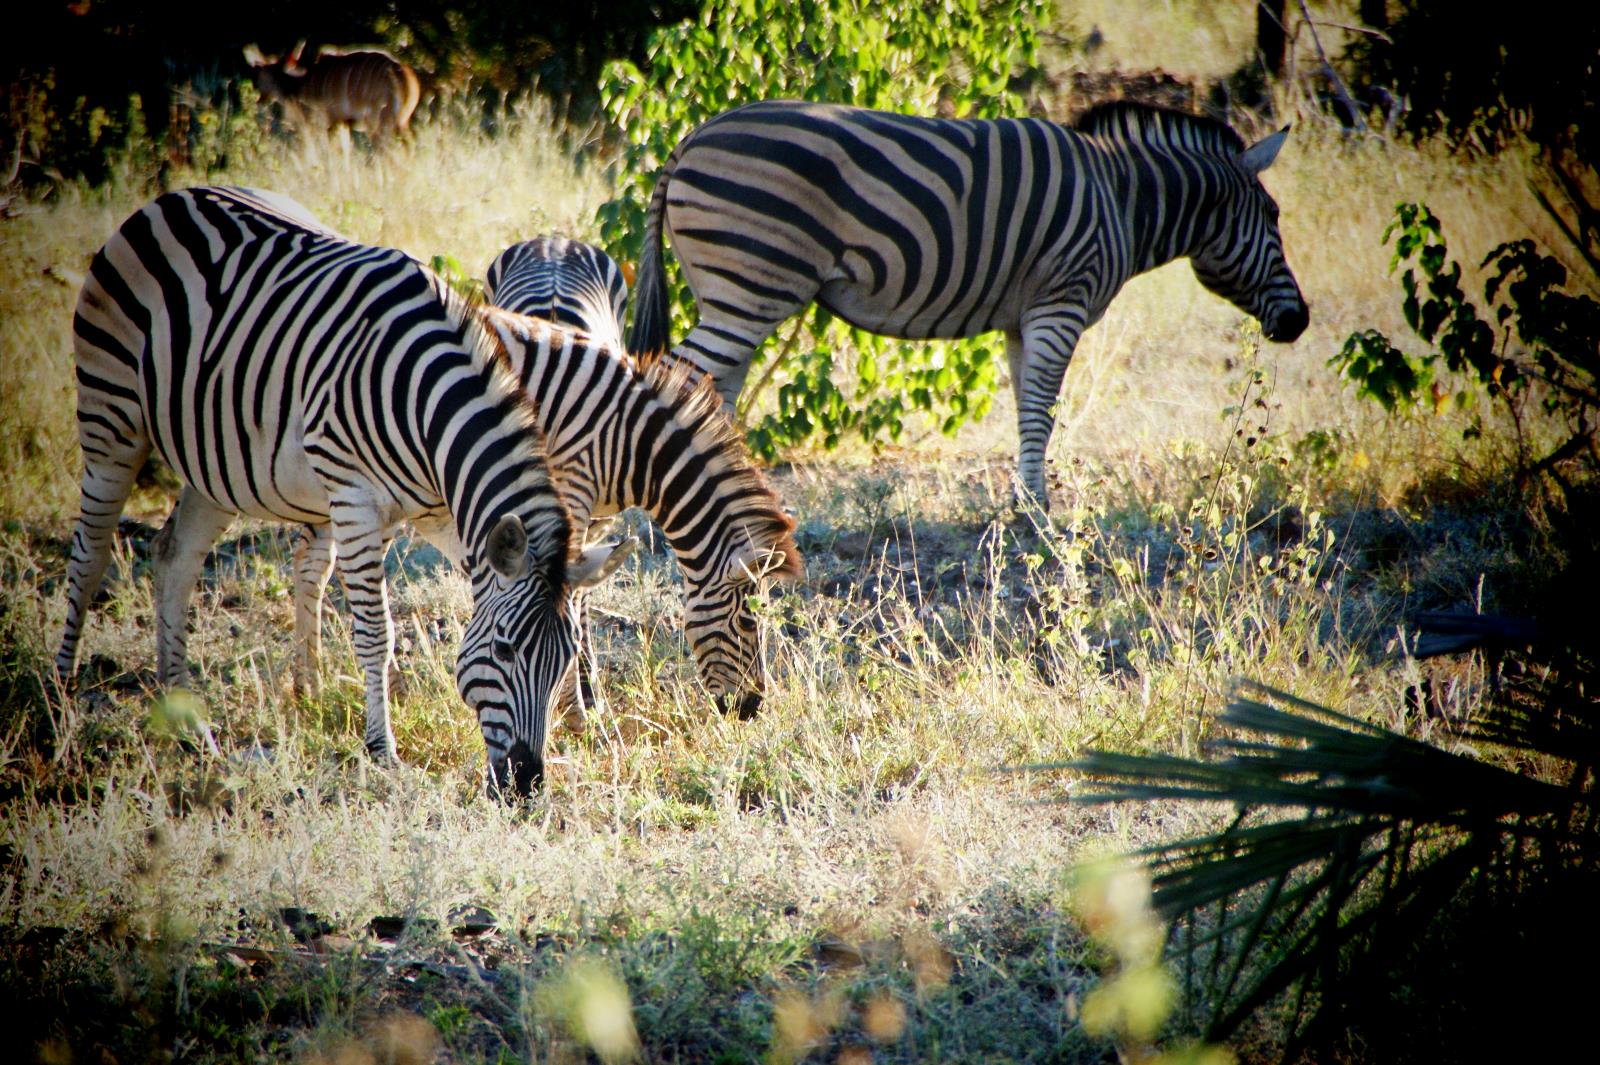 Game Drives through the Eastern Cape Game Parks in South Africa, Zebra sightings